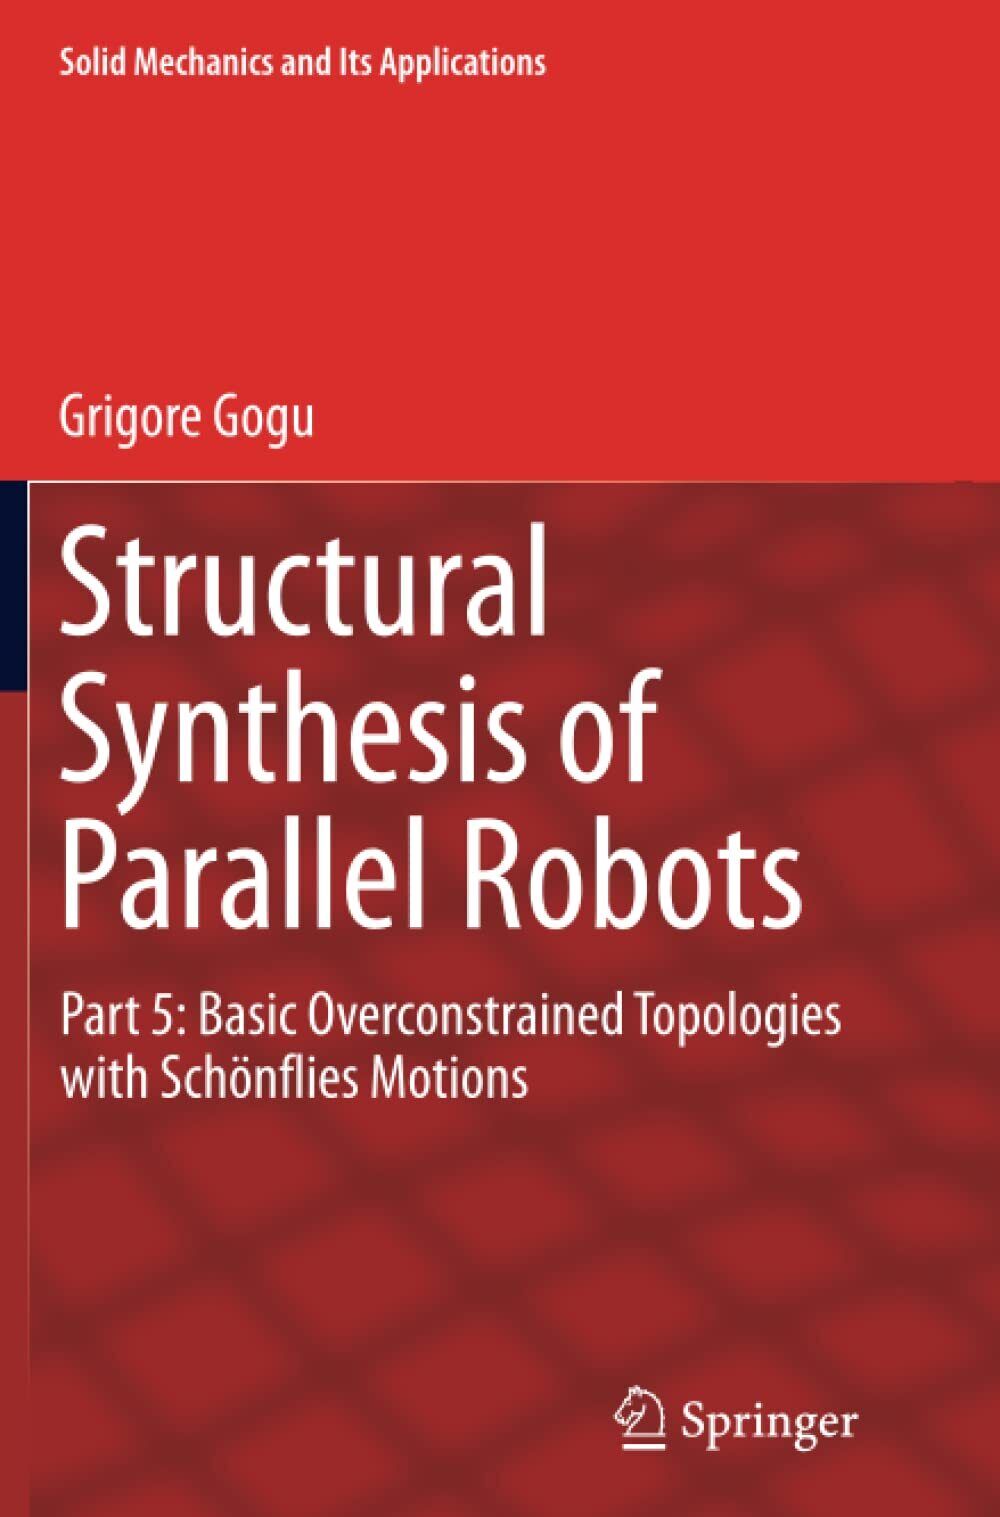 Structural Synthesis of Parallel Robots - Grigore Gogu - Springer, 2016